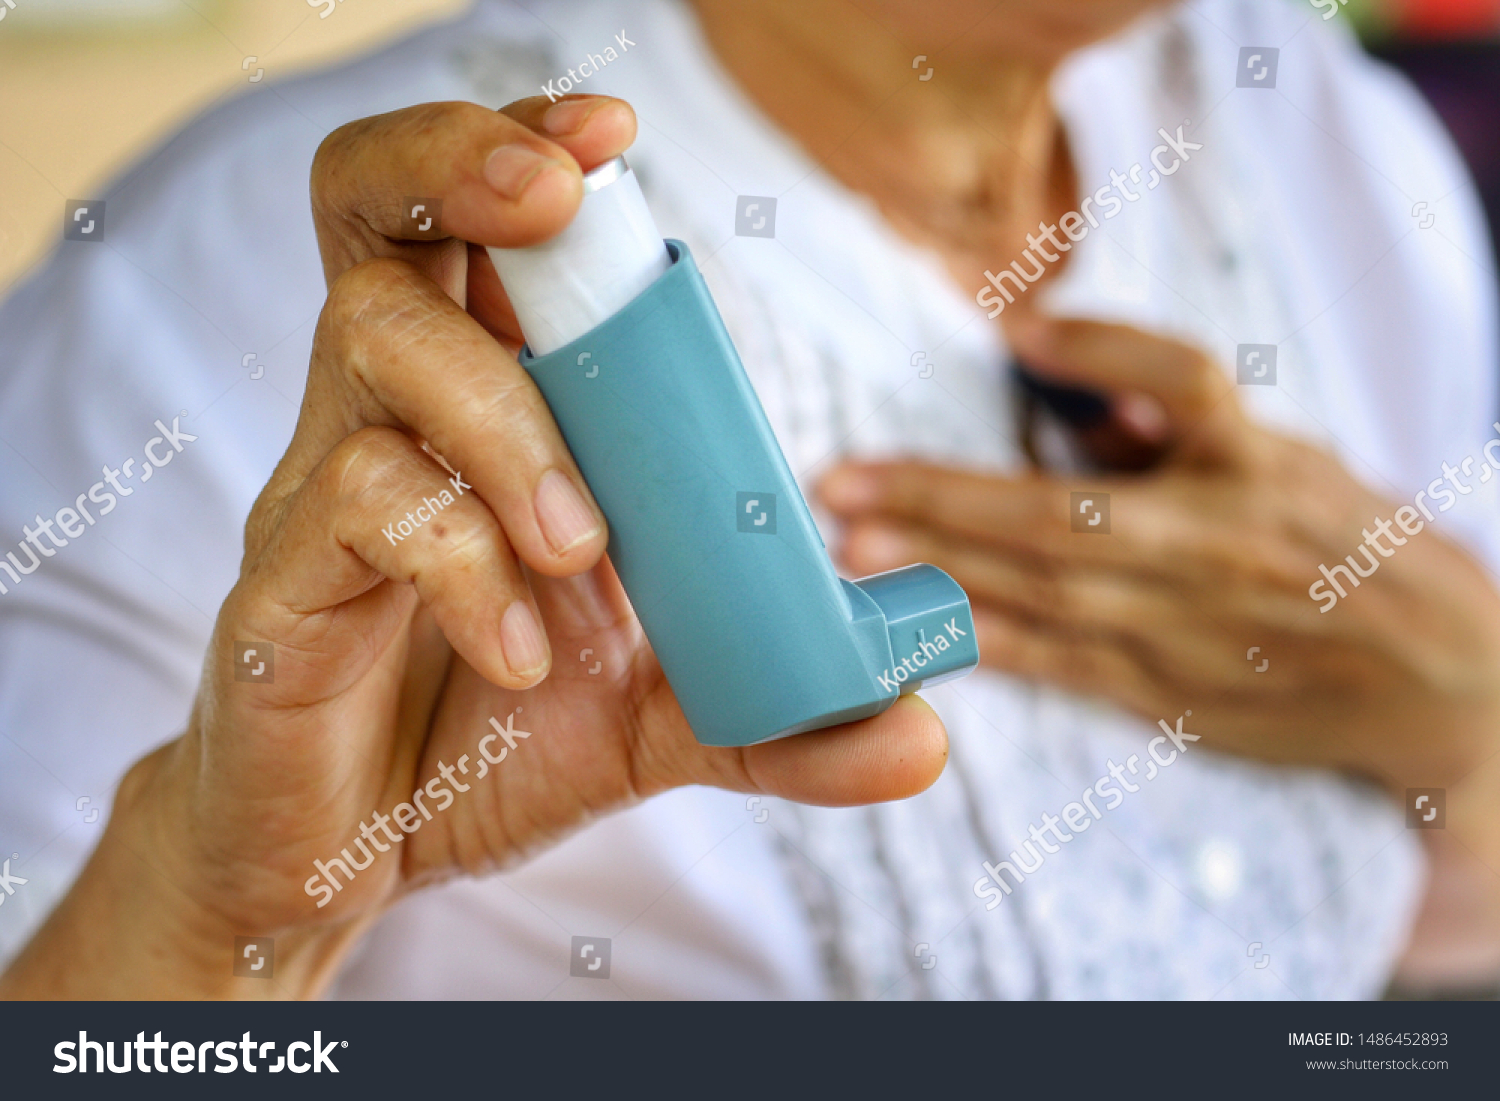 Elderly Female's hand use inhaler while difficulty of breathing.Medication for relief bronchospasm or Dyspnea from asthma attack or allergy,that's an emergency condition.Healthcare and medical concept #1486452893